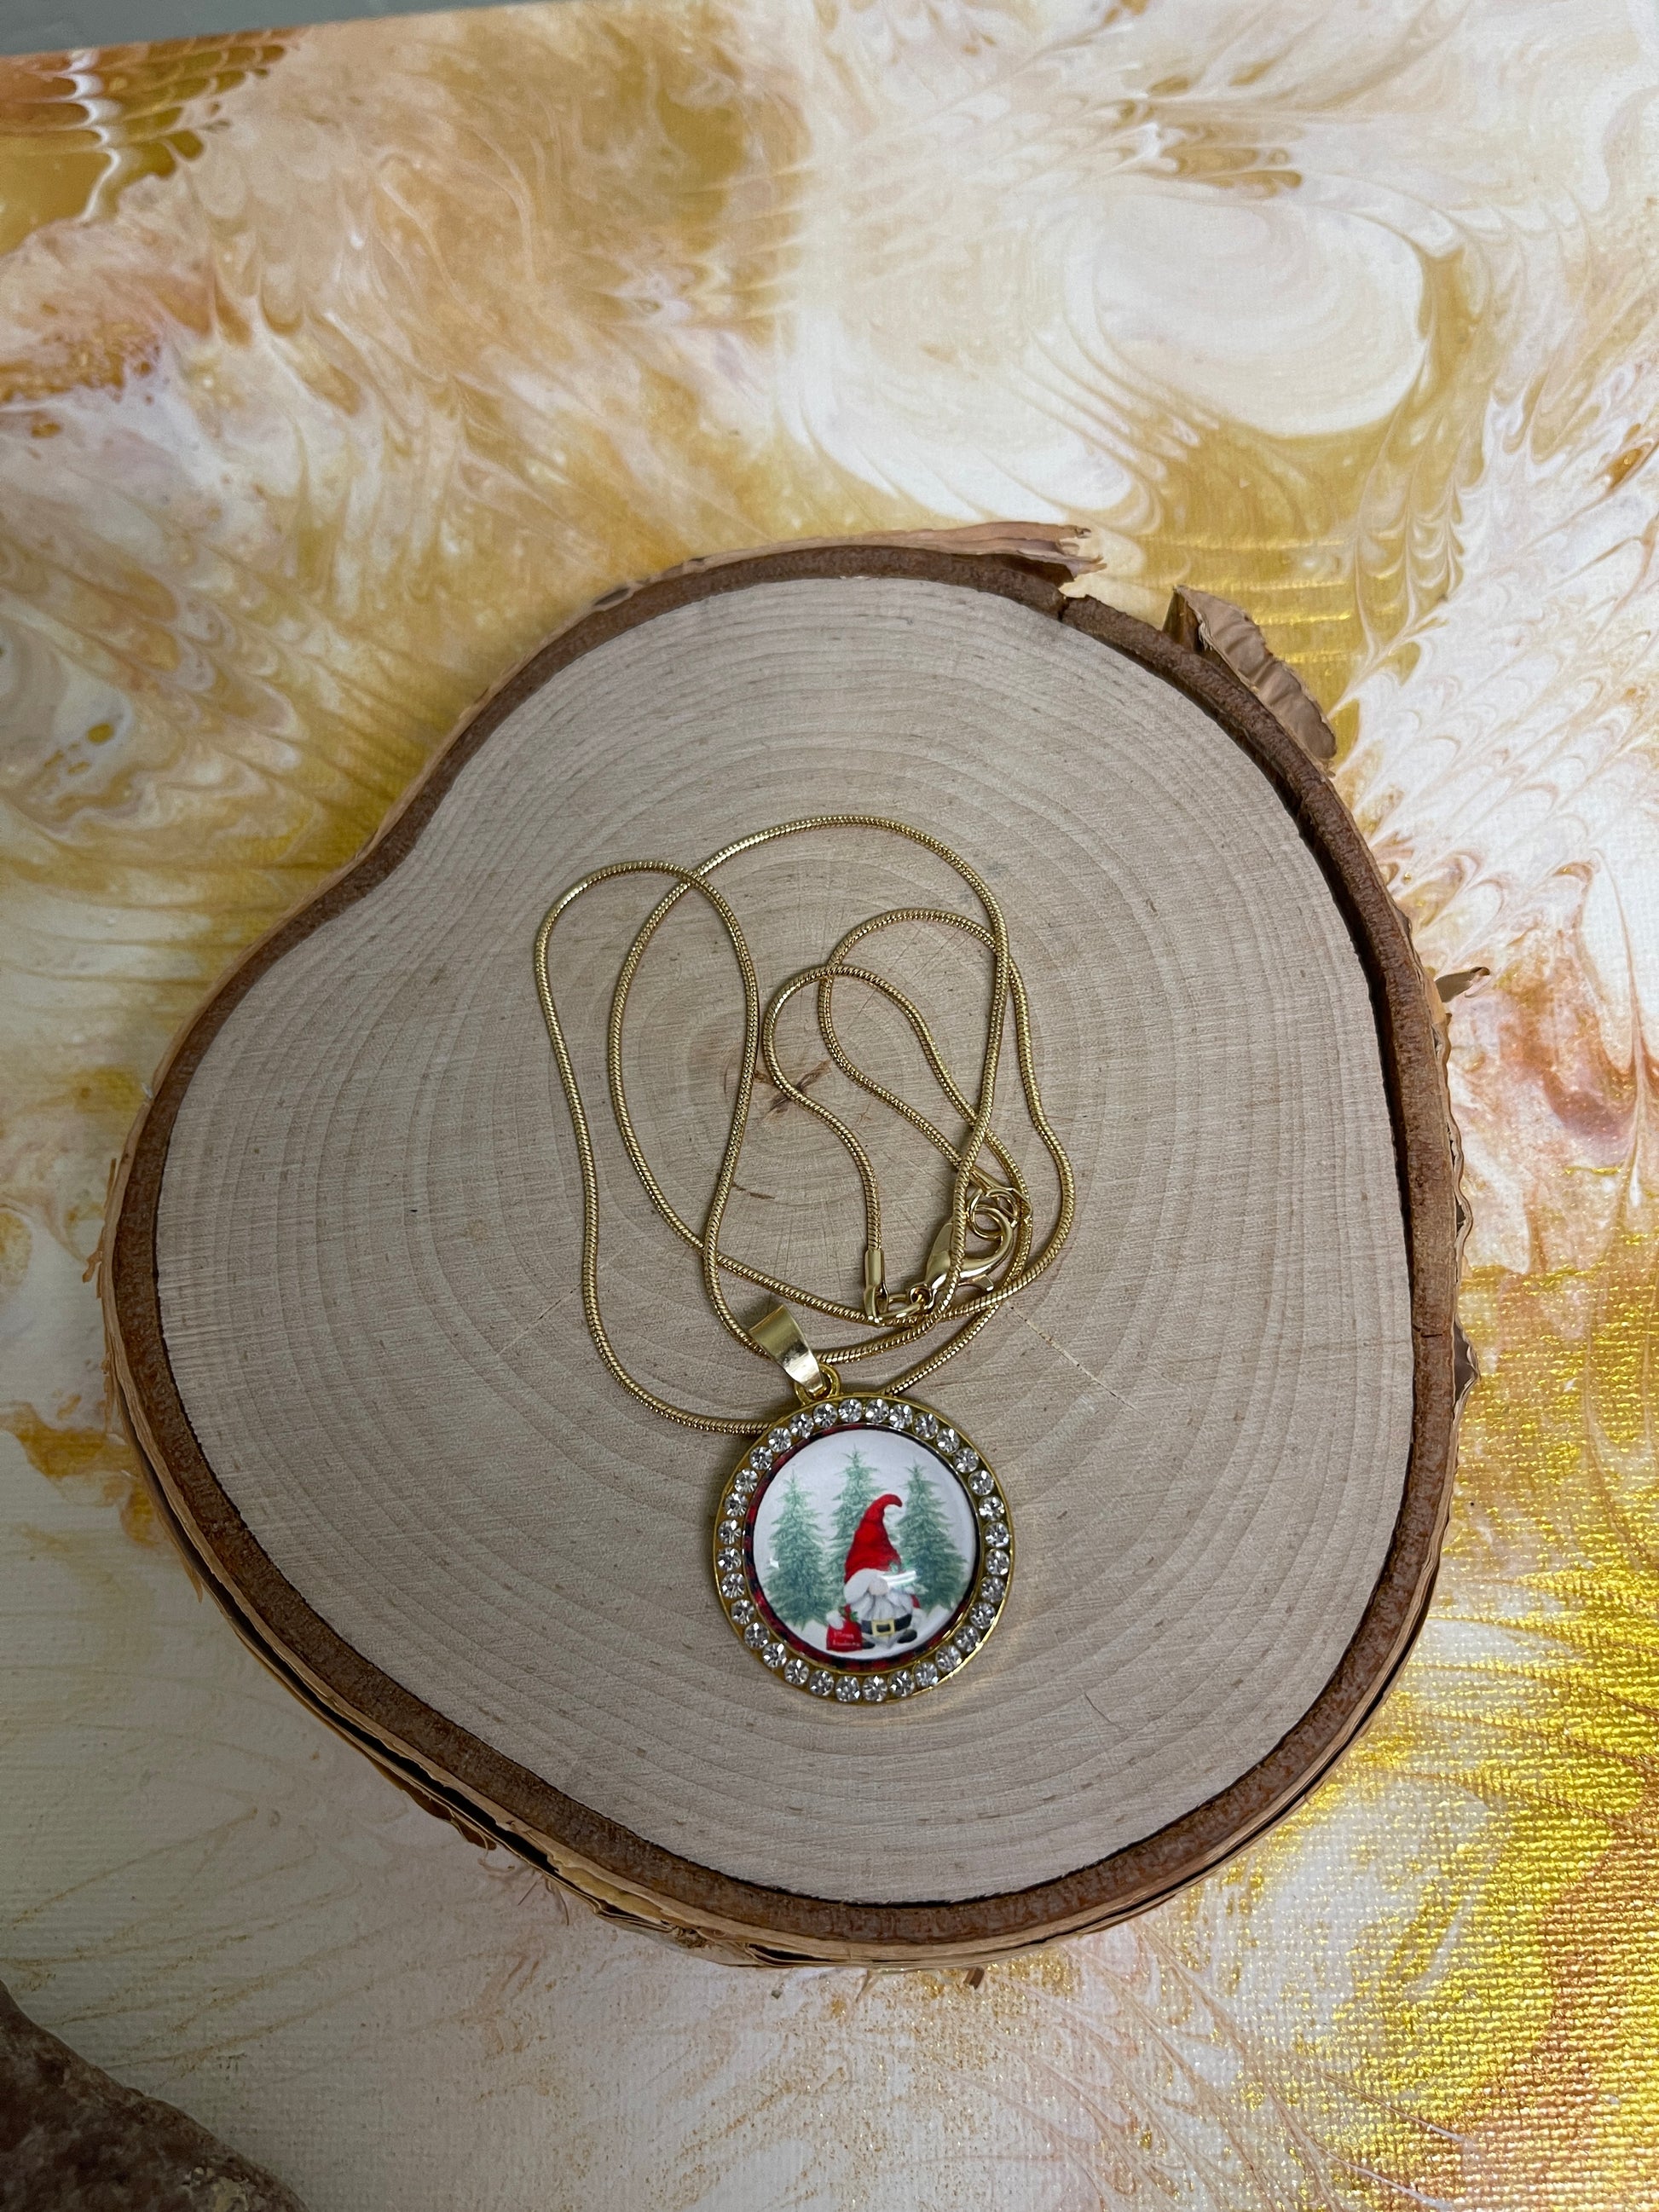 Gnome for the Holiday Cabochon Pendant on a Gold chain Necklace-3Pink tiful of LOVE